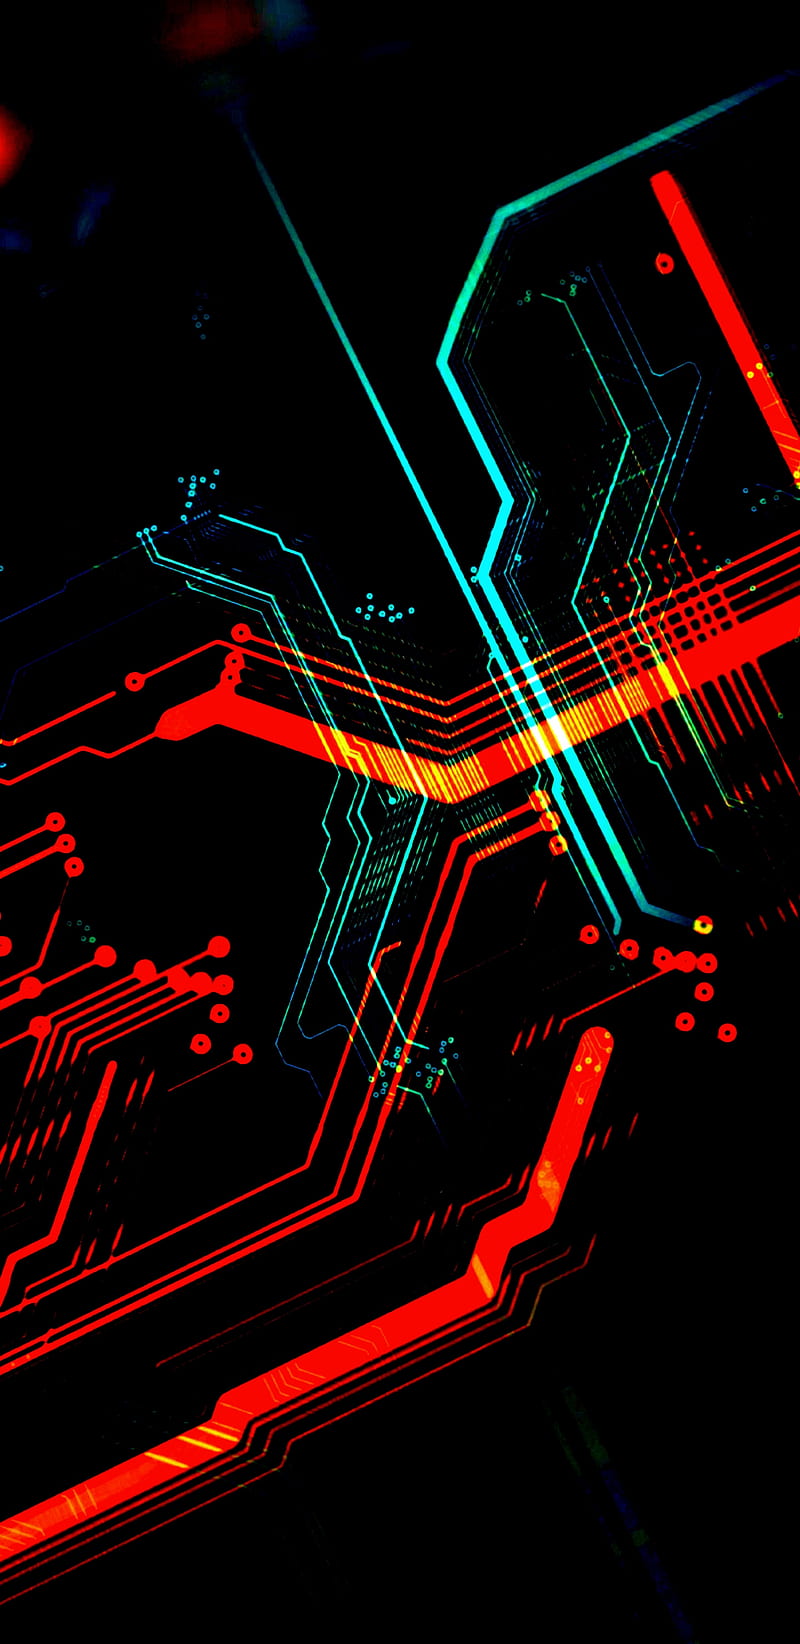 Curcuit board, circuit, circuits, computer, gradient, led, science, tech, technology, tron, HD phone wallpaper